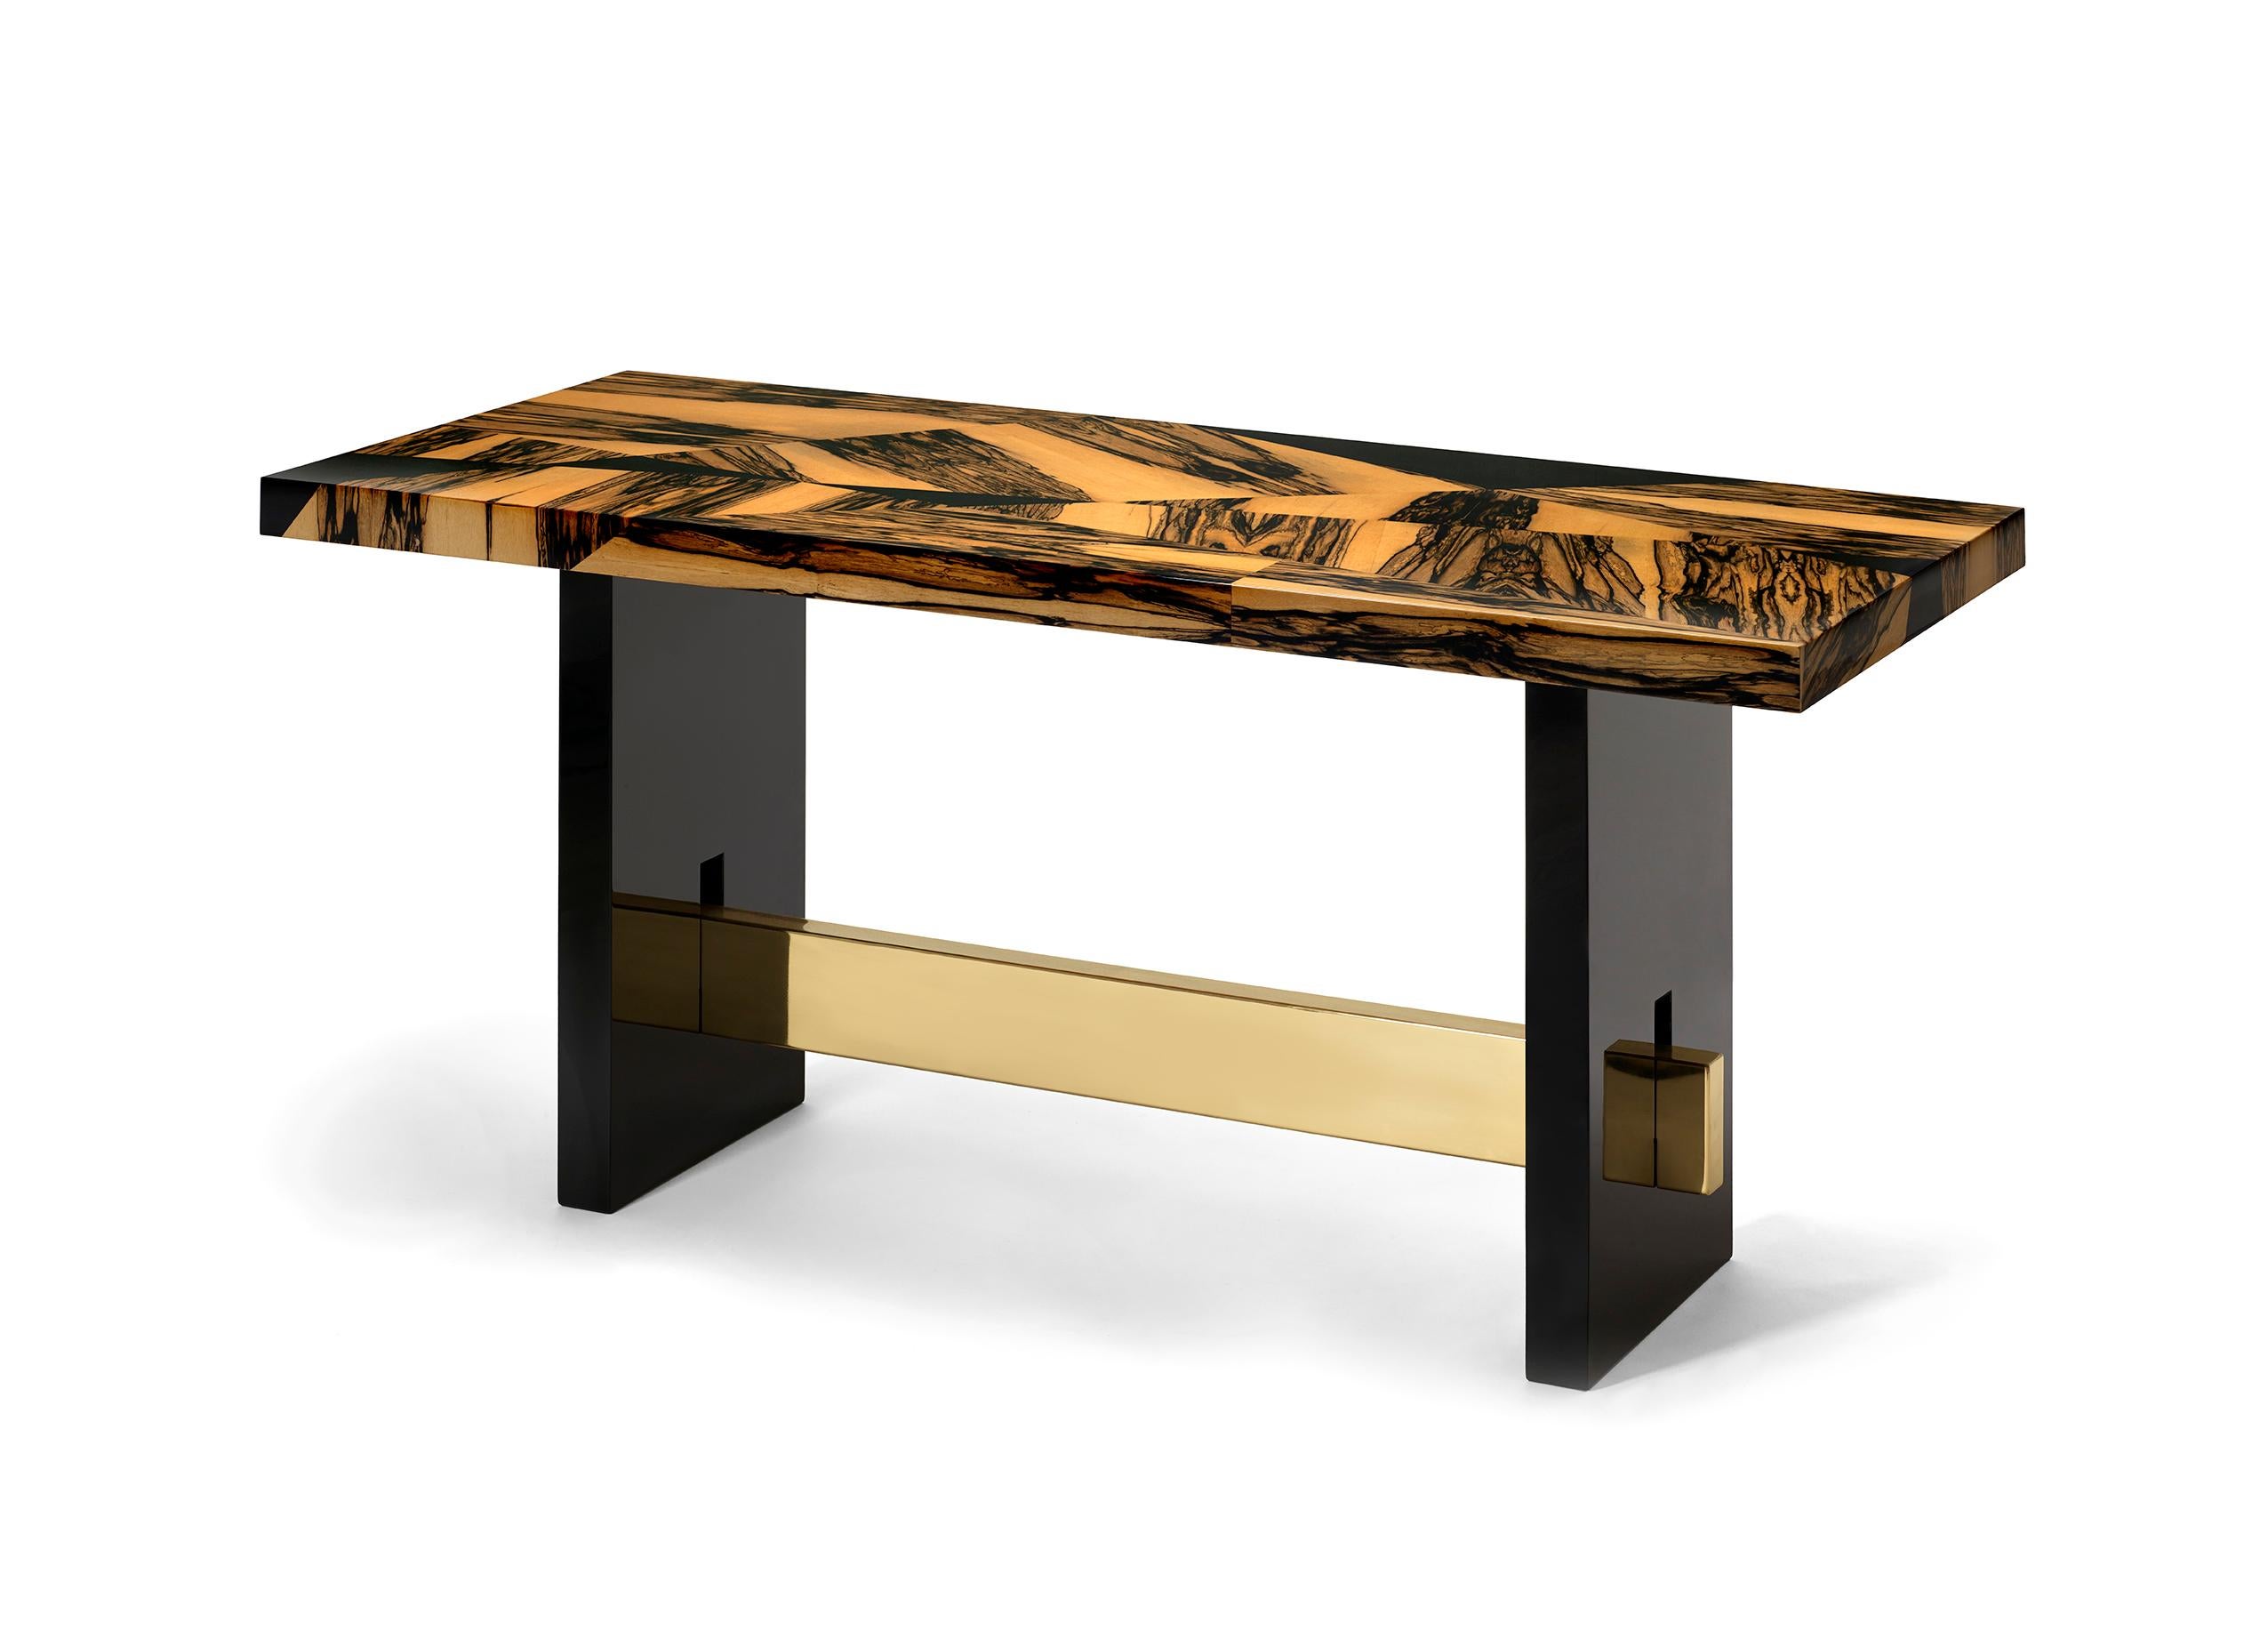 Geometry Console by DUISTT 
Dimensions: W 140 x D 40 x H 78 cm
Materials: White Ebony Marquetry Top, Black Lacquered and Brass

The geometry console uses the traditional marquetry technique in a contemporary design being a statement console that